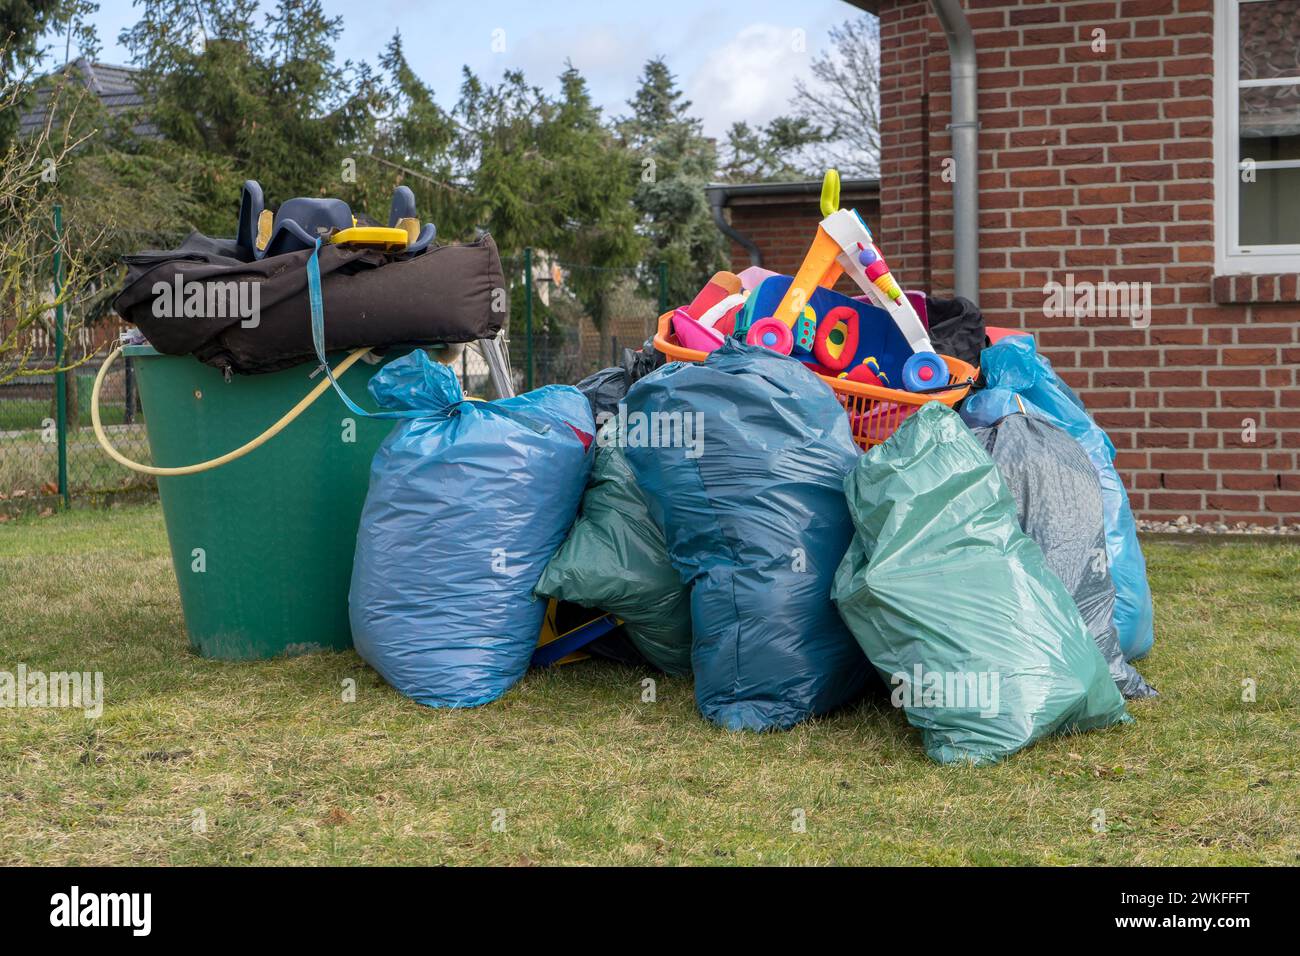 Pile of bulky waste in front of a house with garbage bags, rain barrels and toys Stock Photo